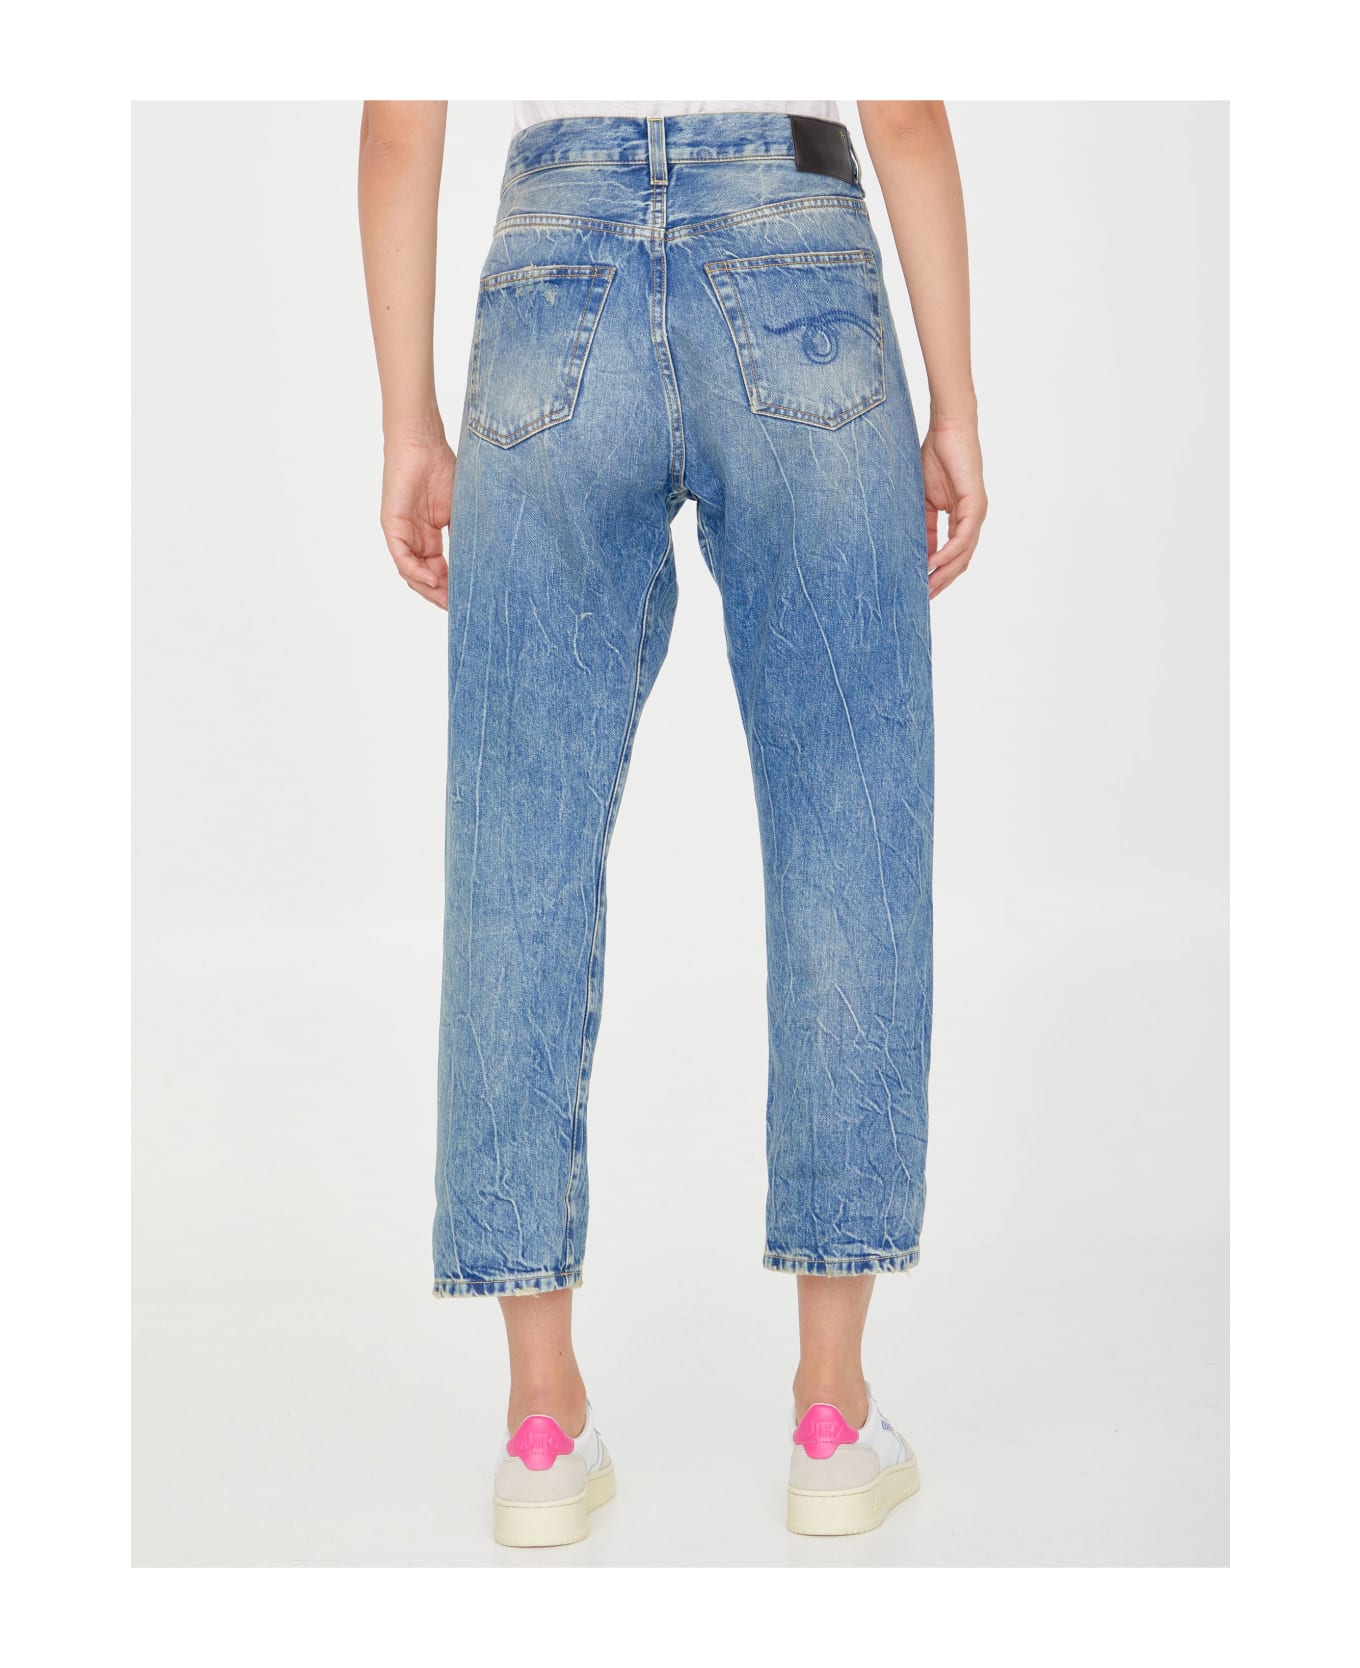 R13 Kelly Crossover Jeans Jeans - KELLY